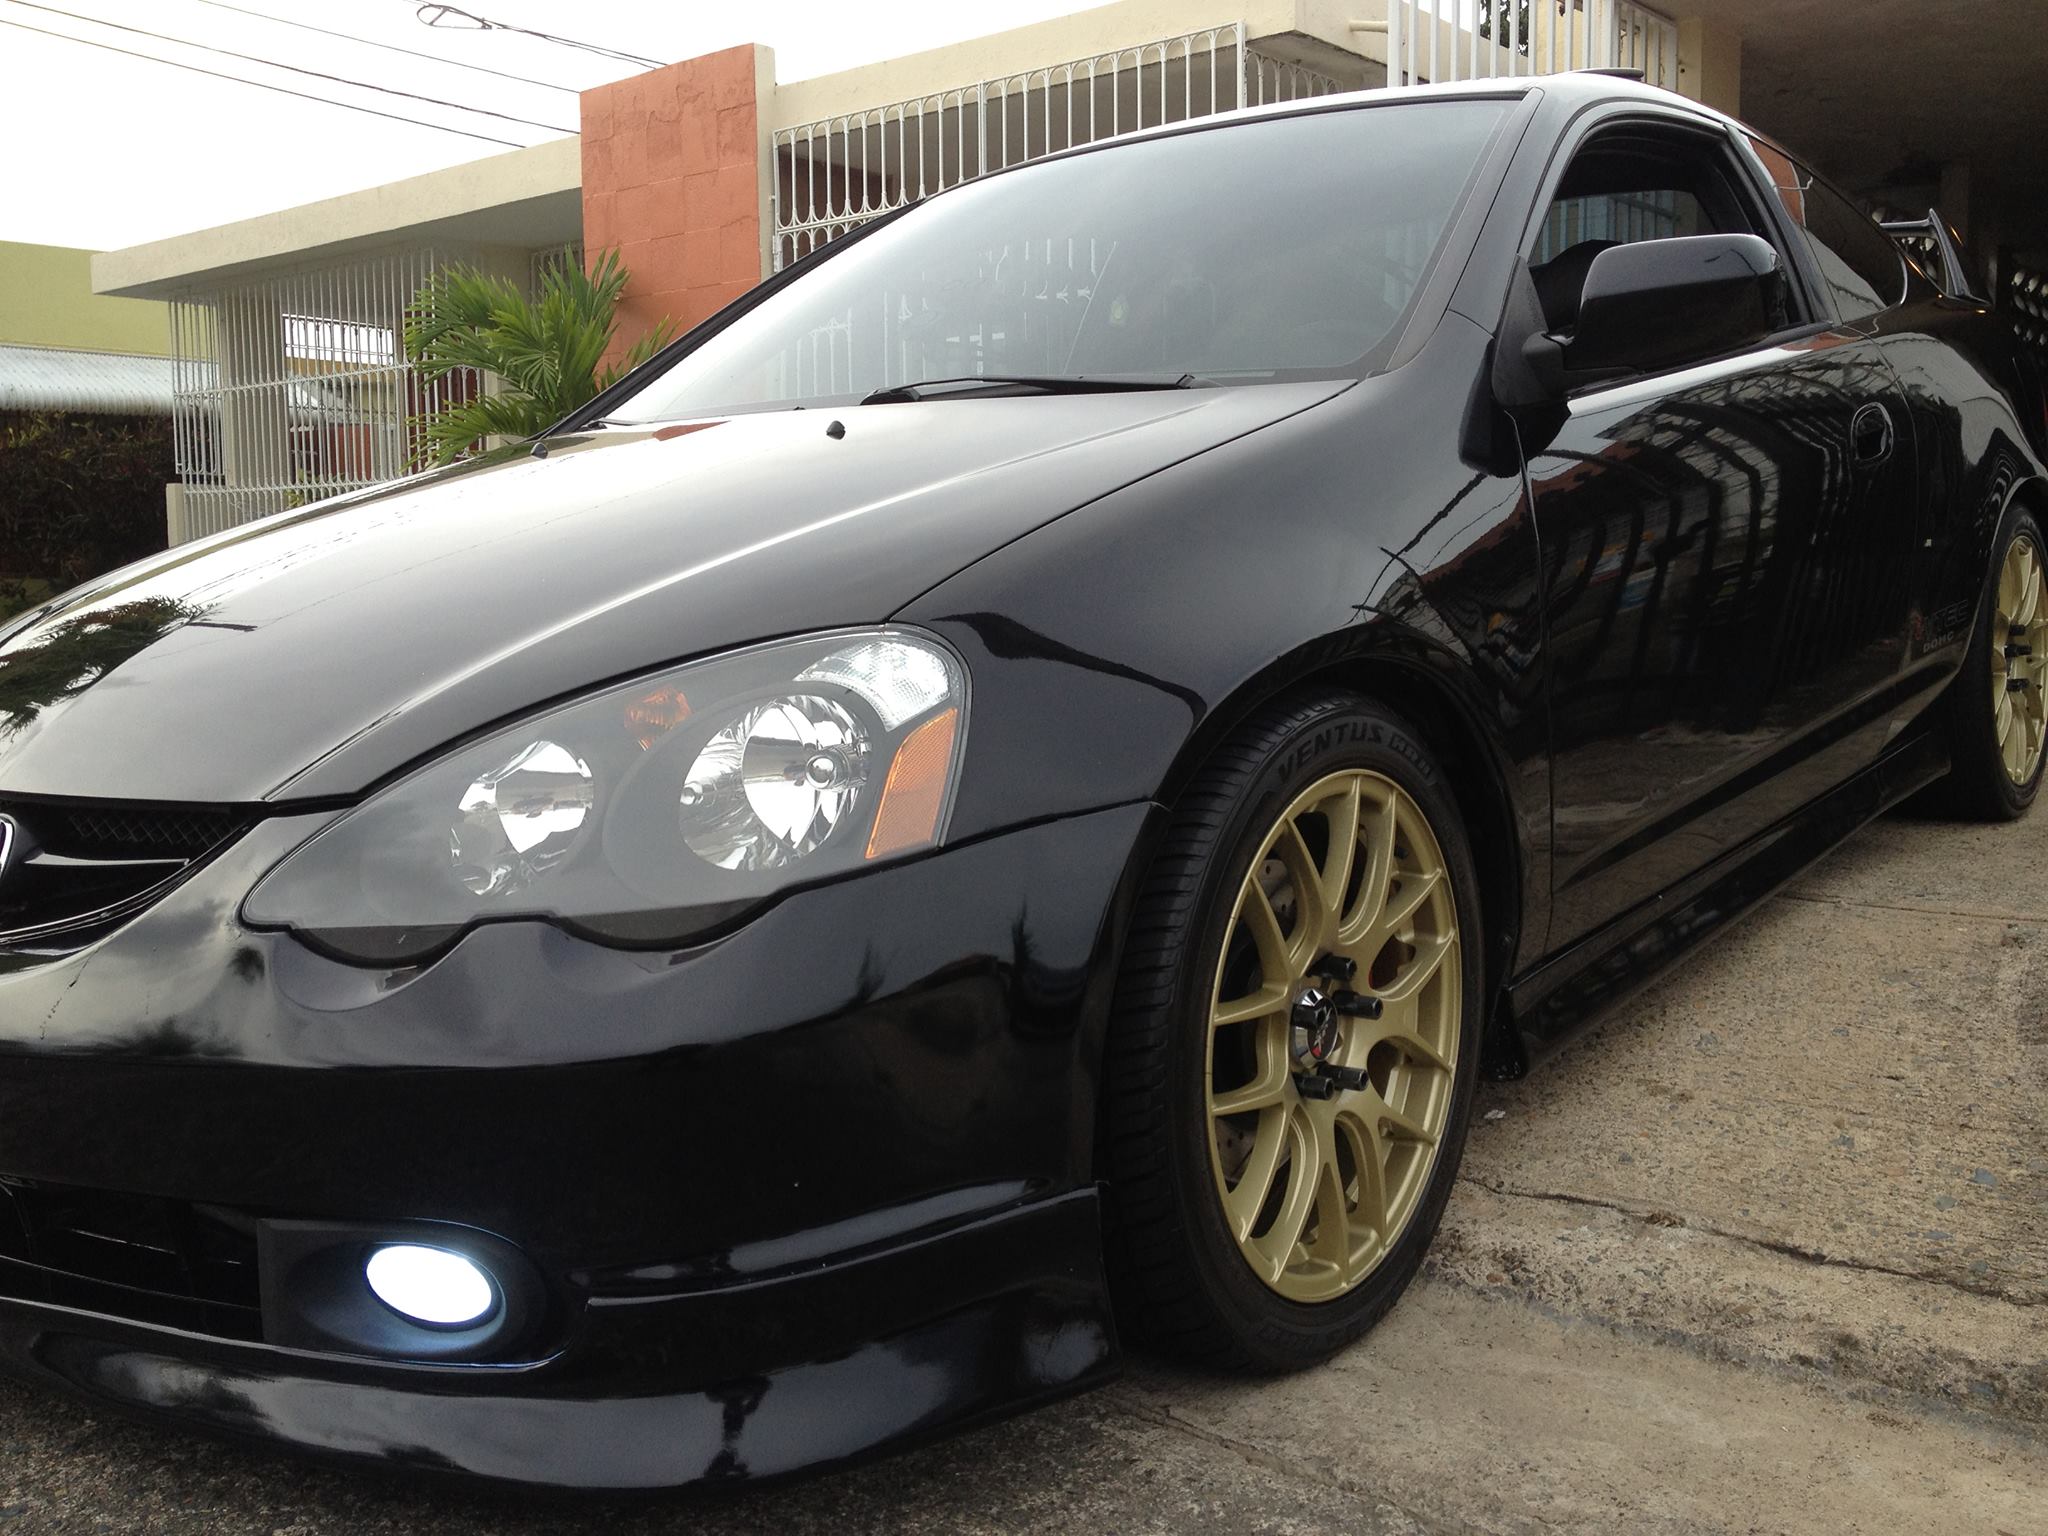 RSX-S